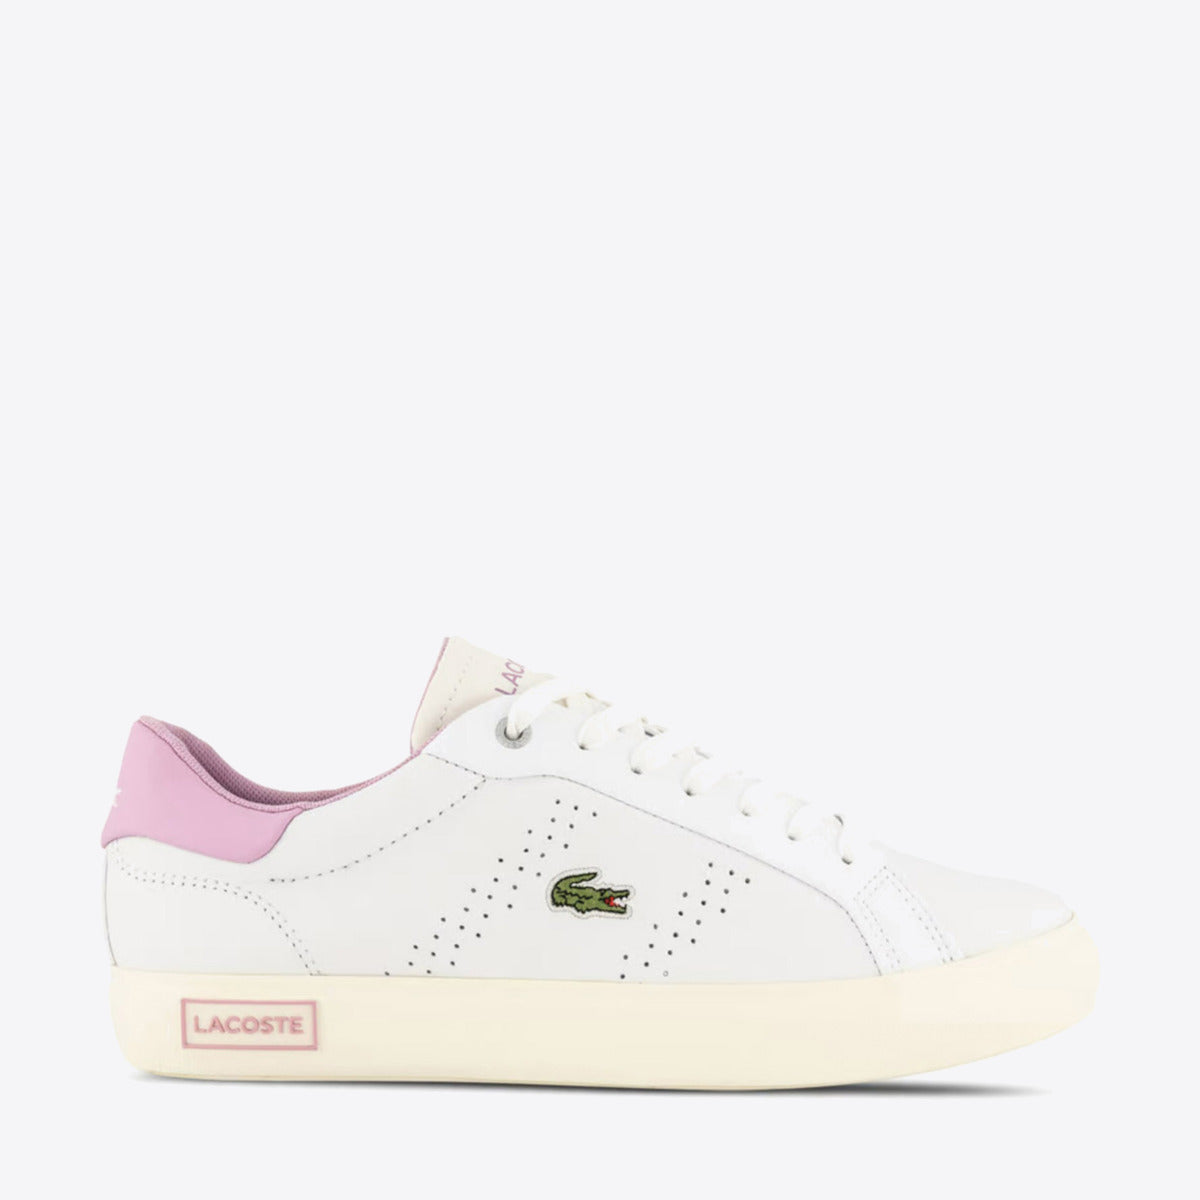 LACOSTE Powercourt 2.0 White/Pink - Image 1